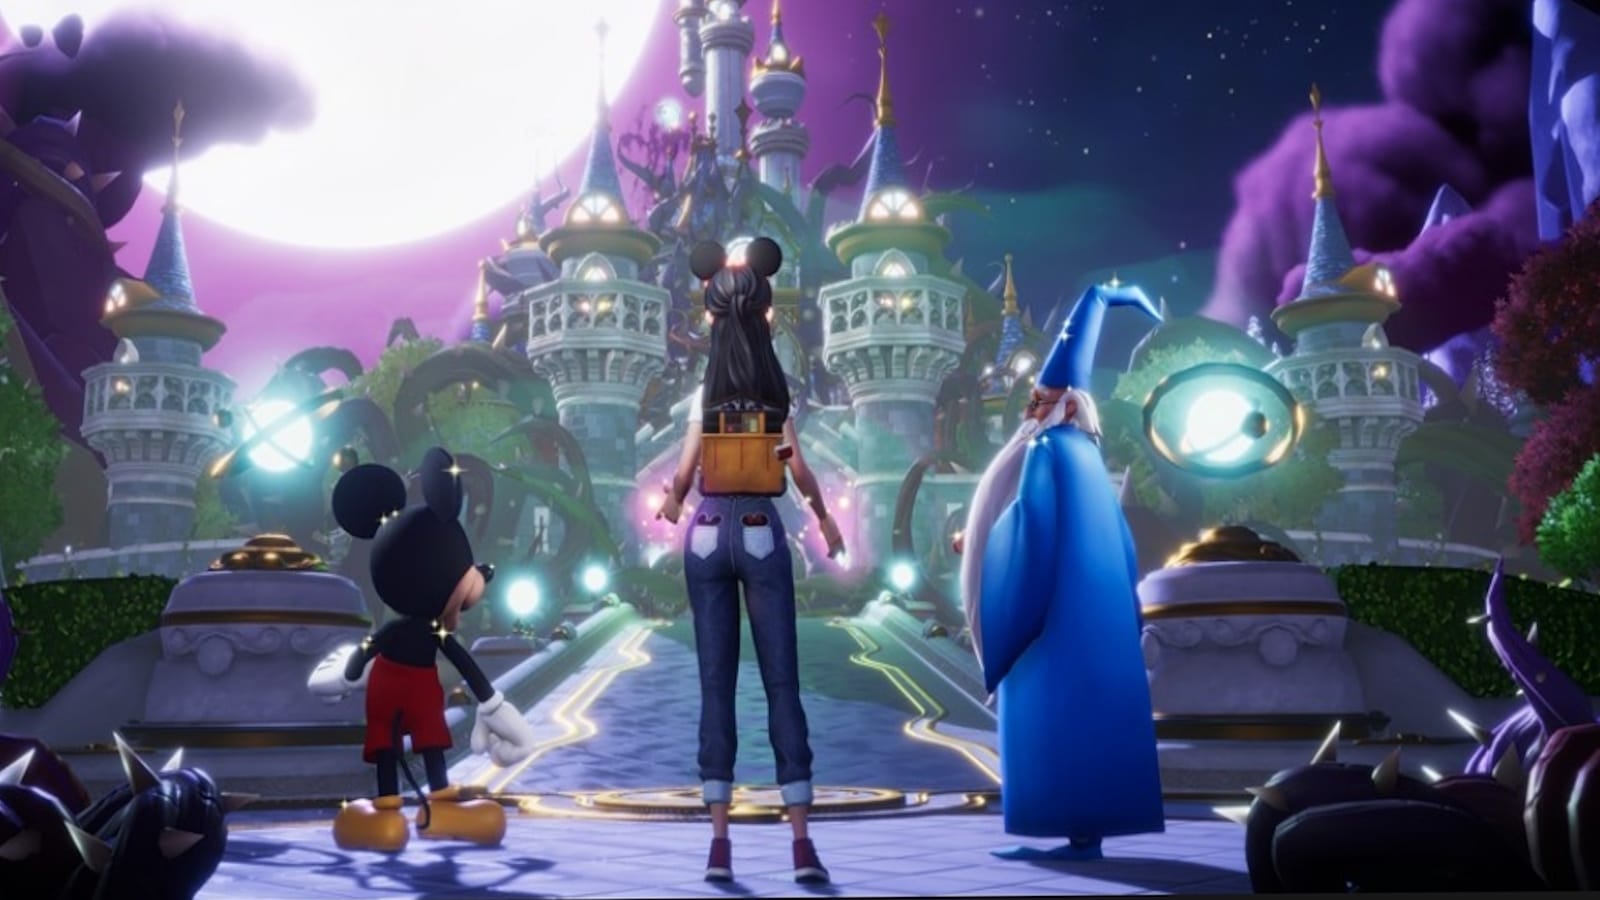 A character with black hair and a backpack stands facing a fantastical castle alongside animated characters mickey mouse and a wizard with a blue hat and robes, under a purple sky.